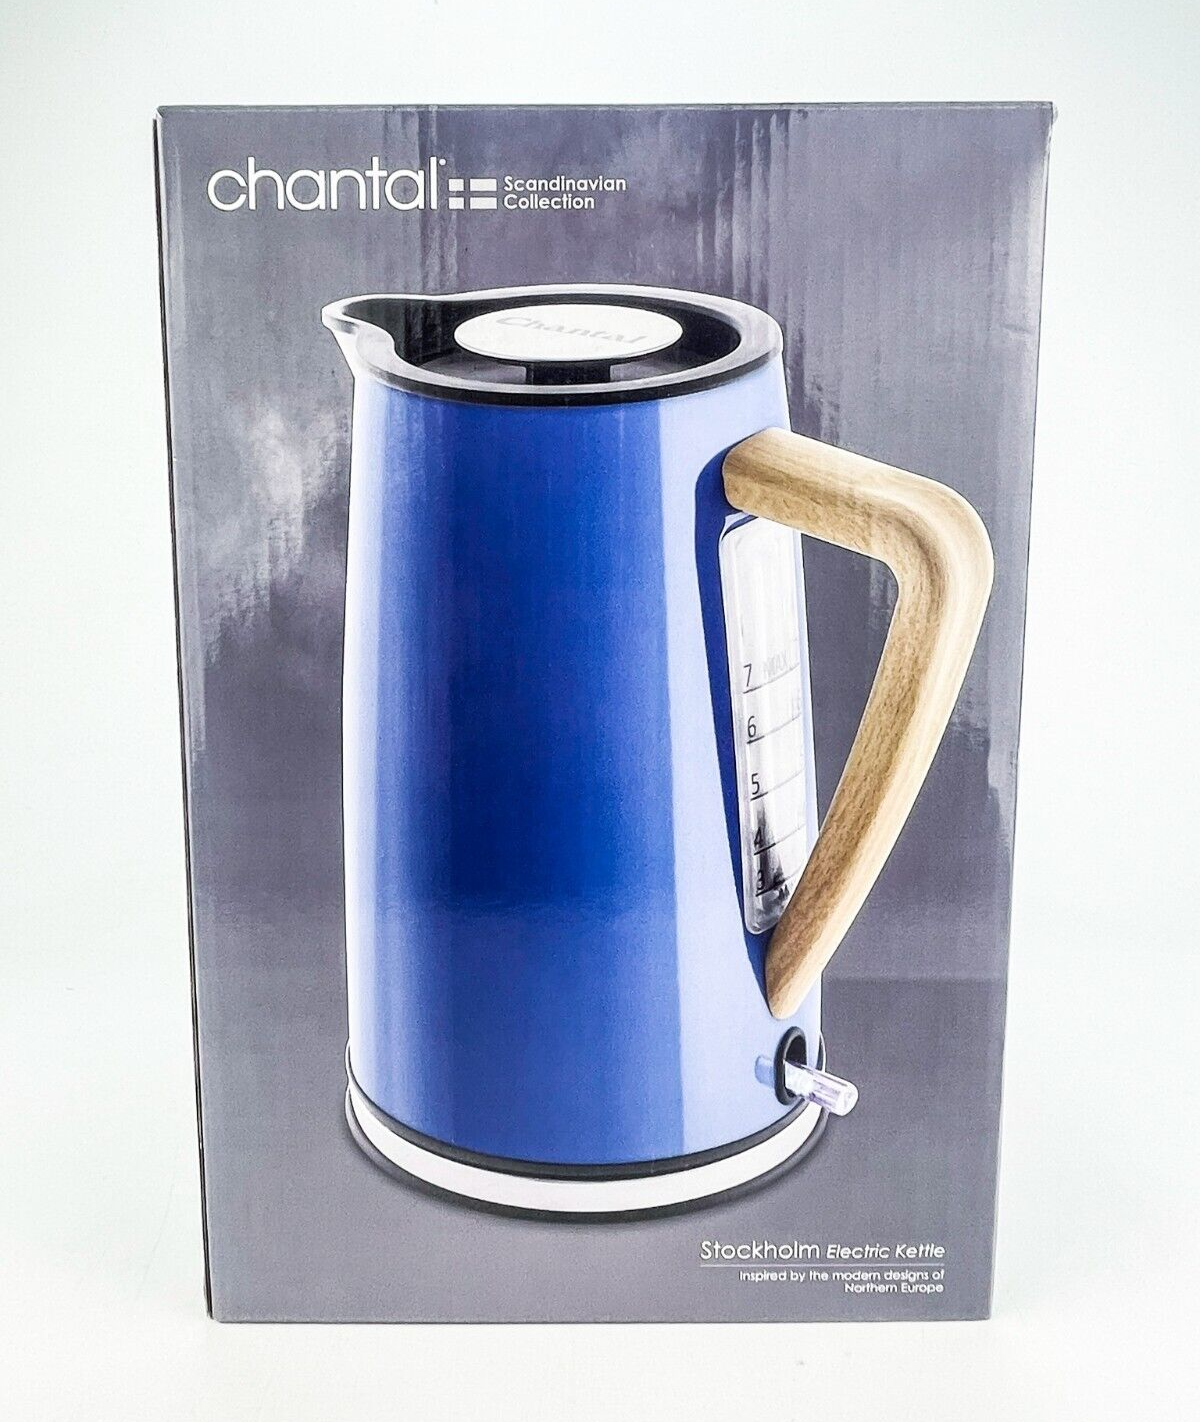 Chantal 1.8 Qt Stockholm Electric Kettle Blue Cove Stainless Steel Ekettle New - $58.00